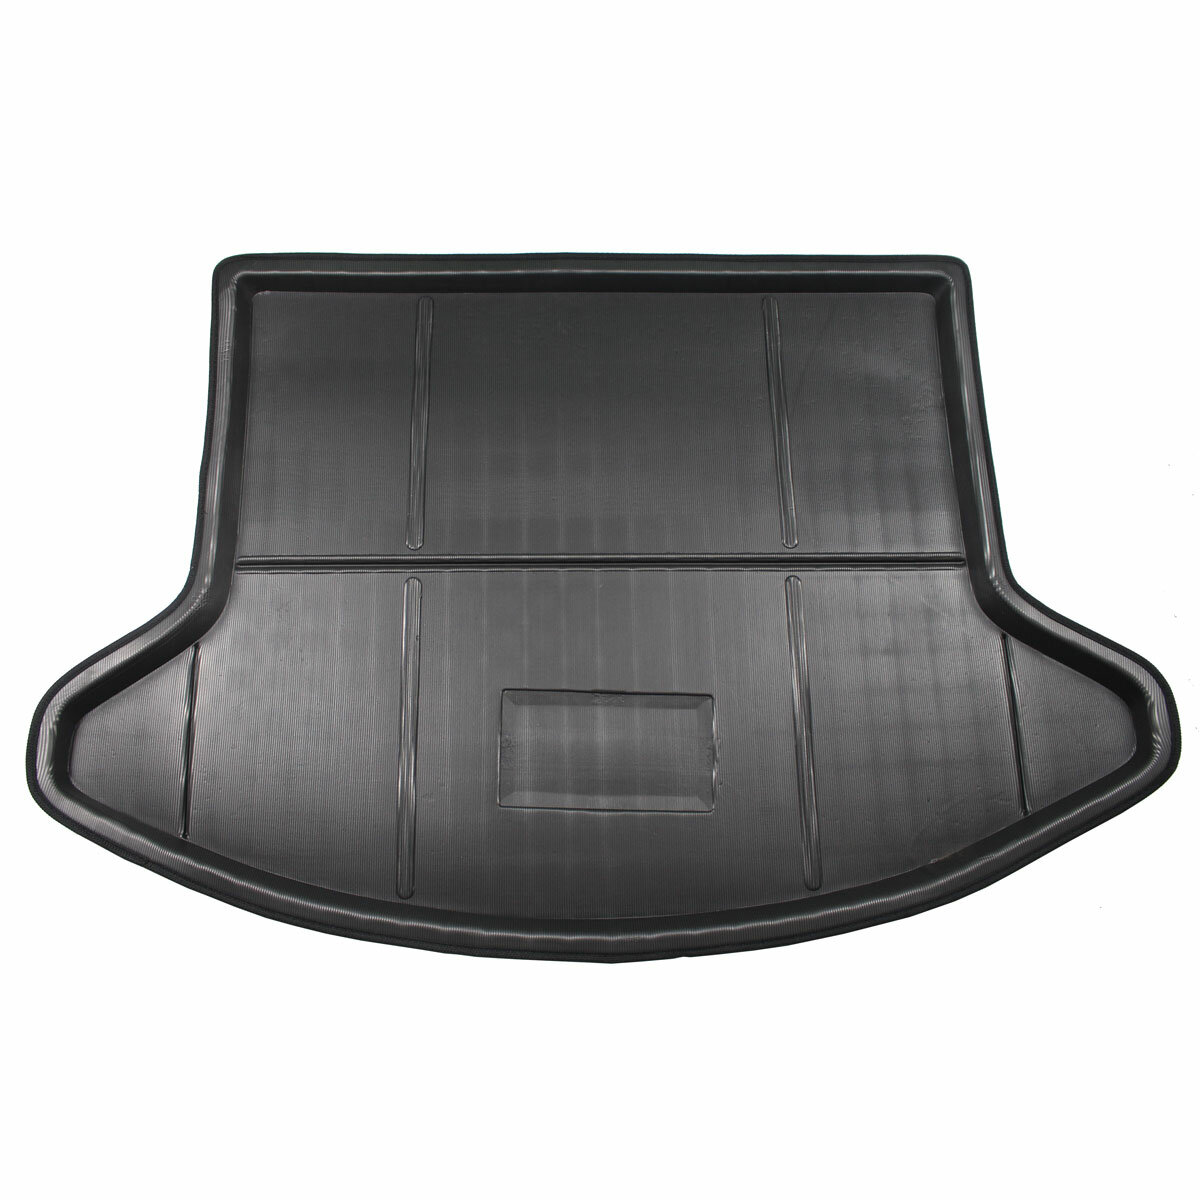 Car Auto Rear Trunk Cargo Boot Liner Tray Mat Protector For Mazda CX-5 2012-2016